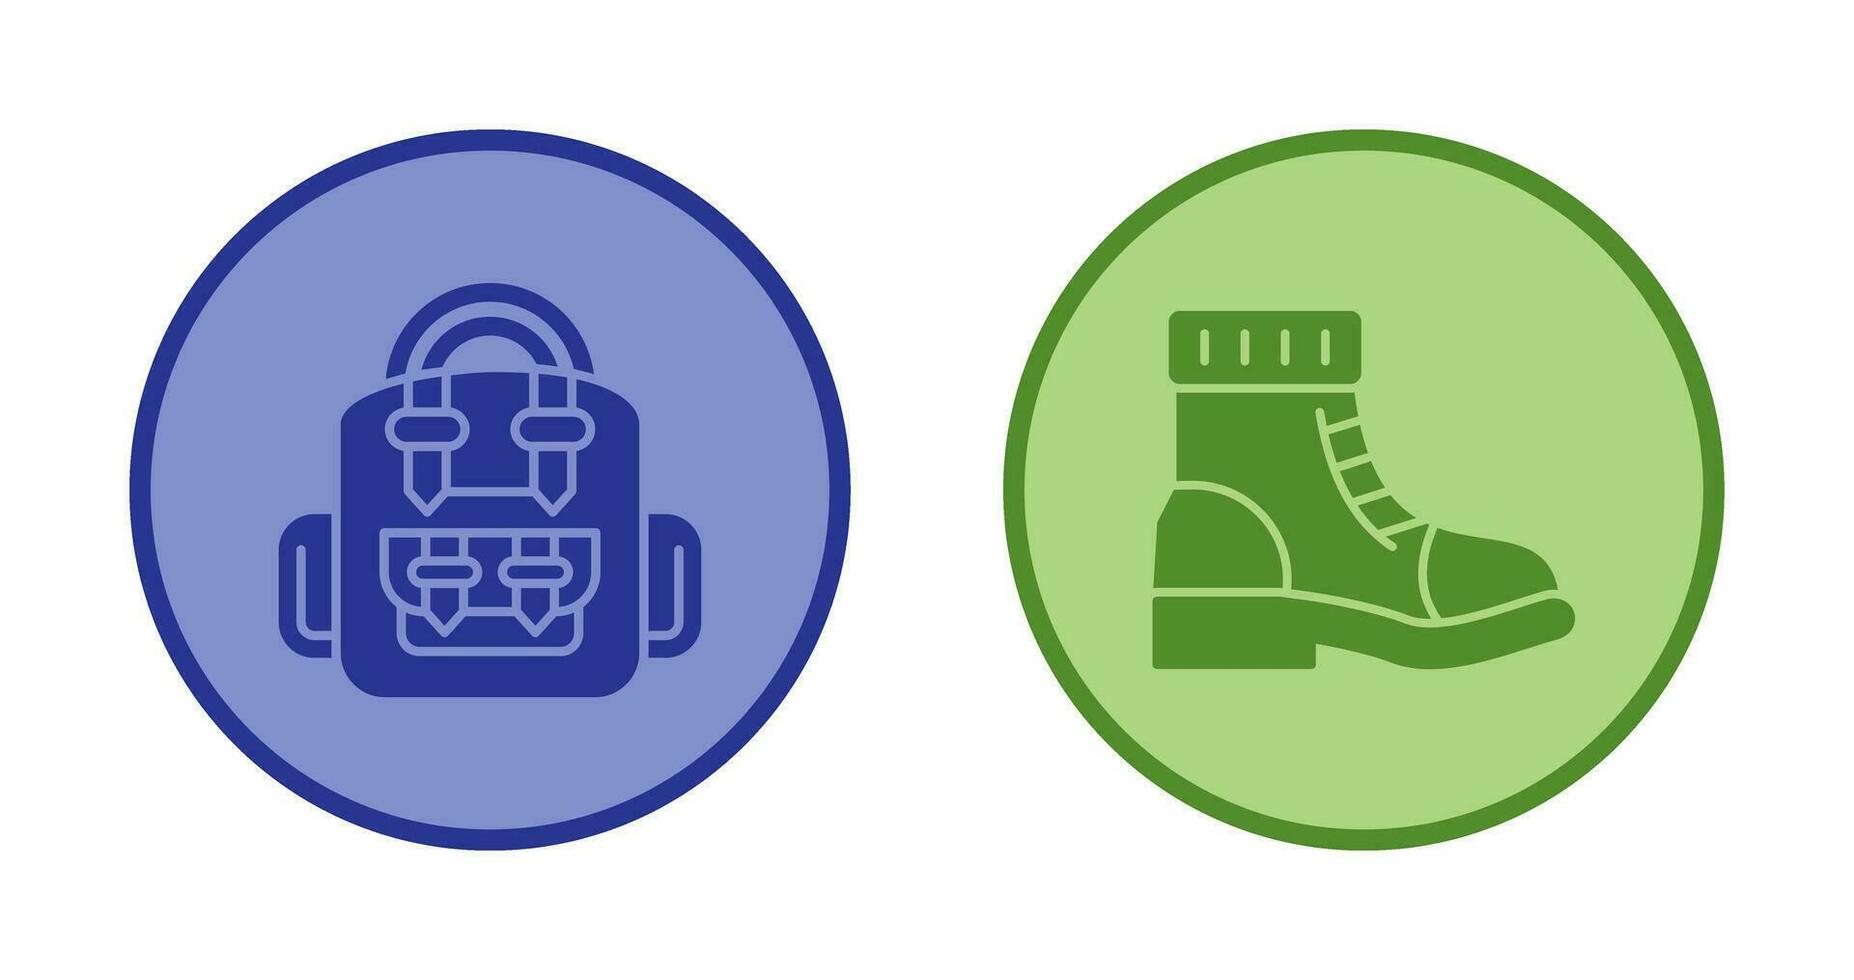 Backpack and Boots Icon vector